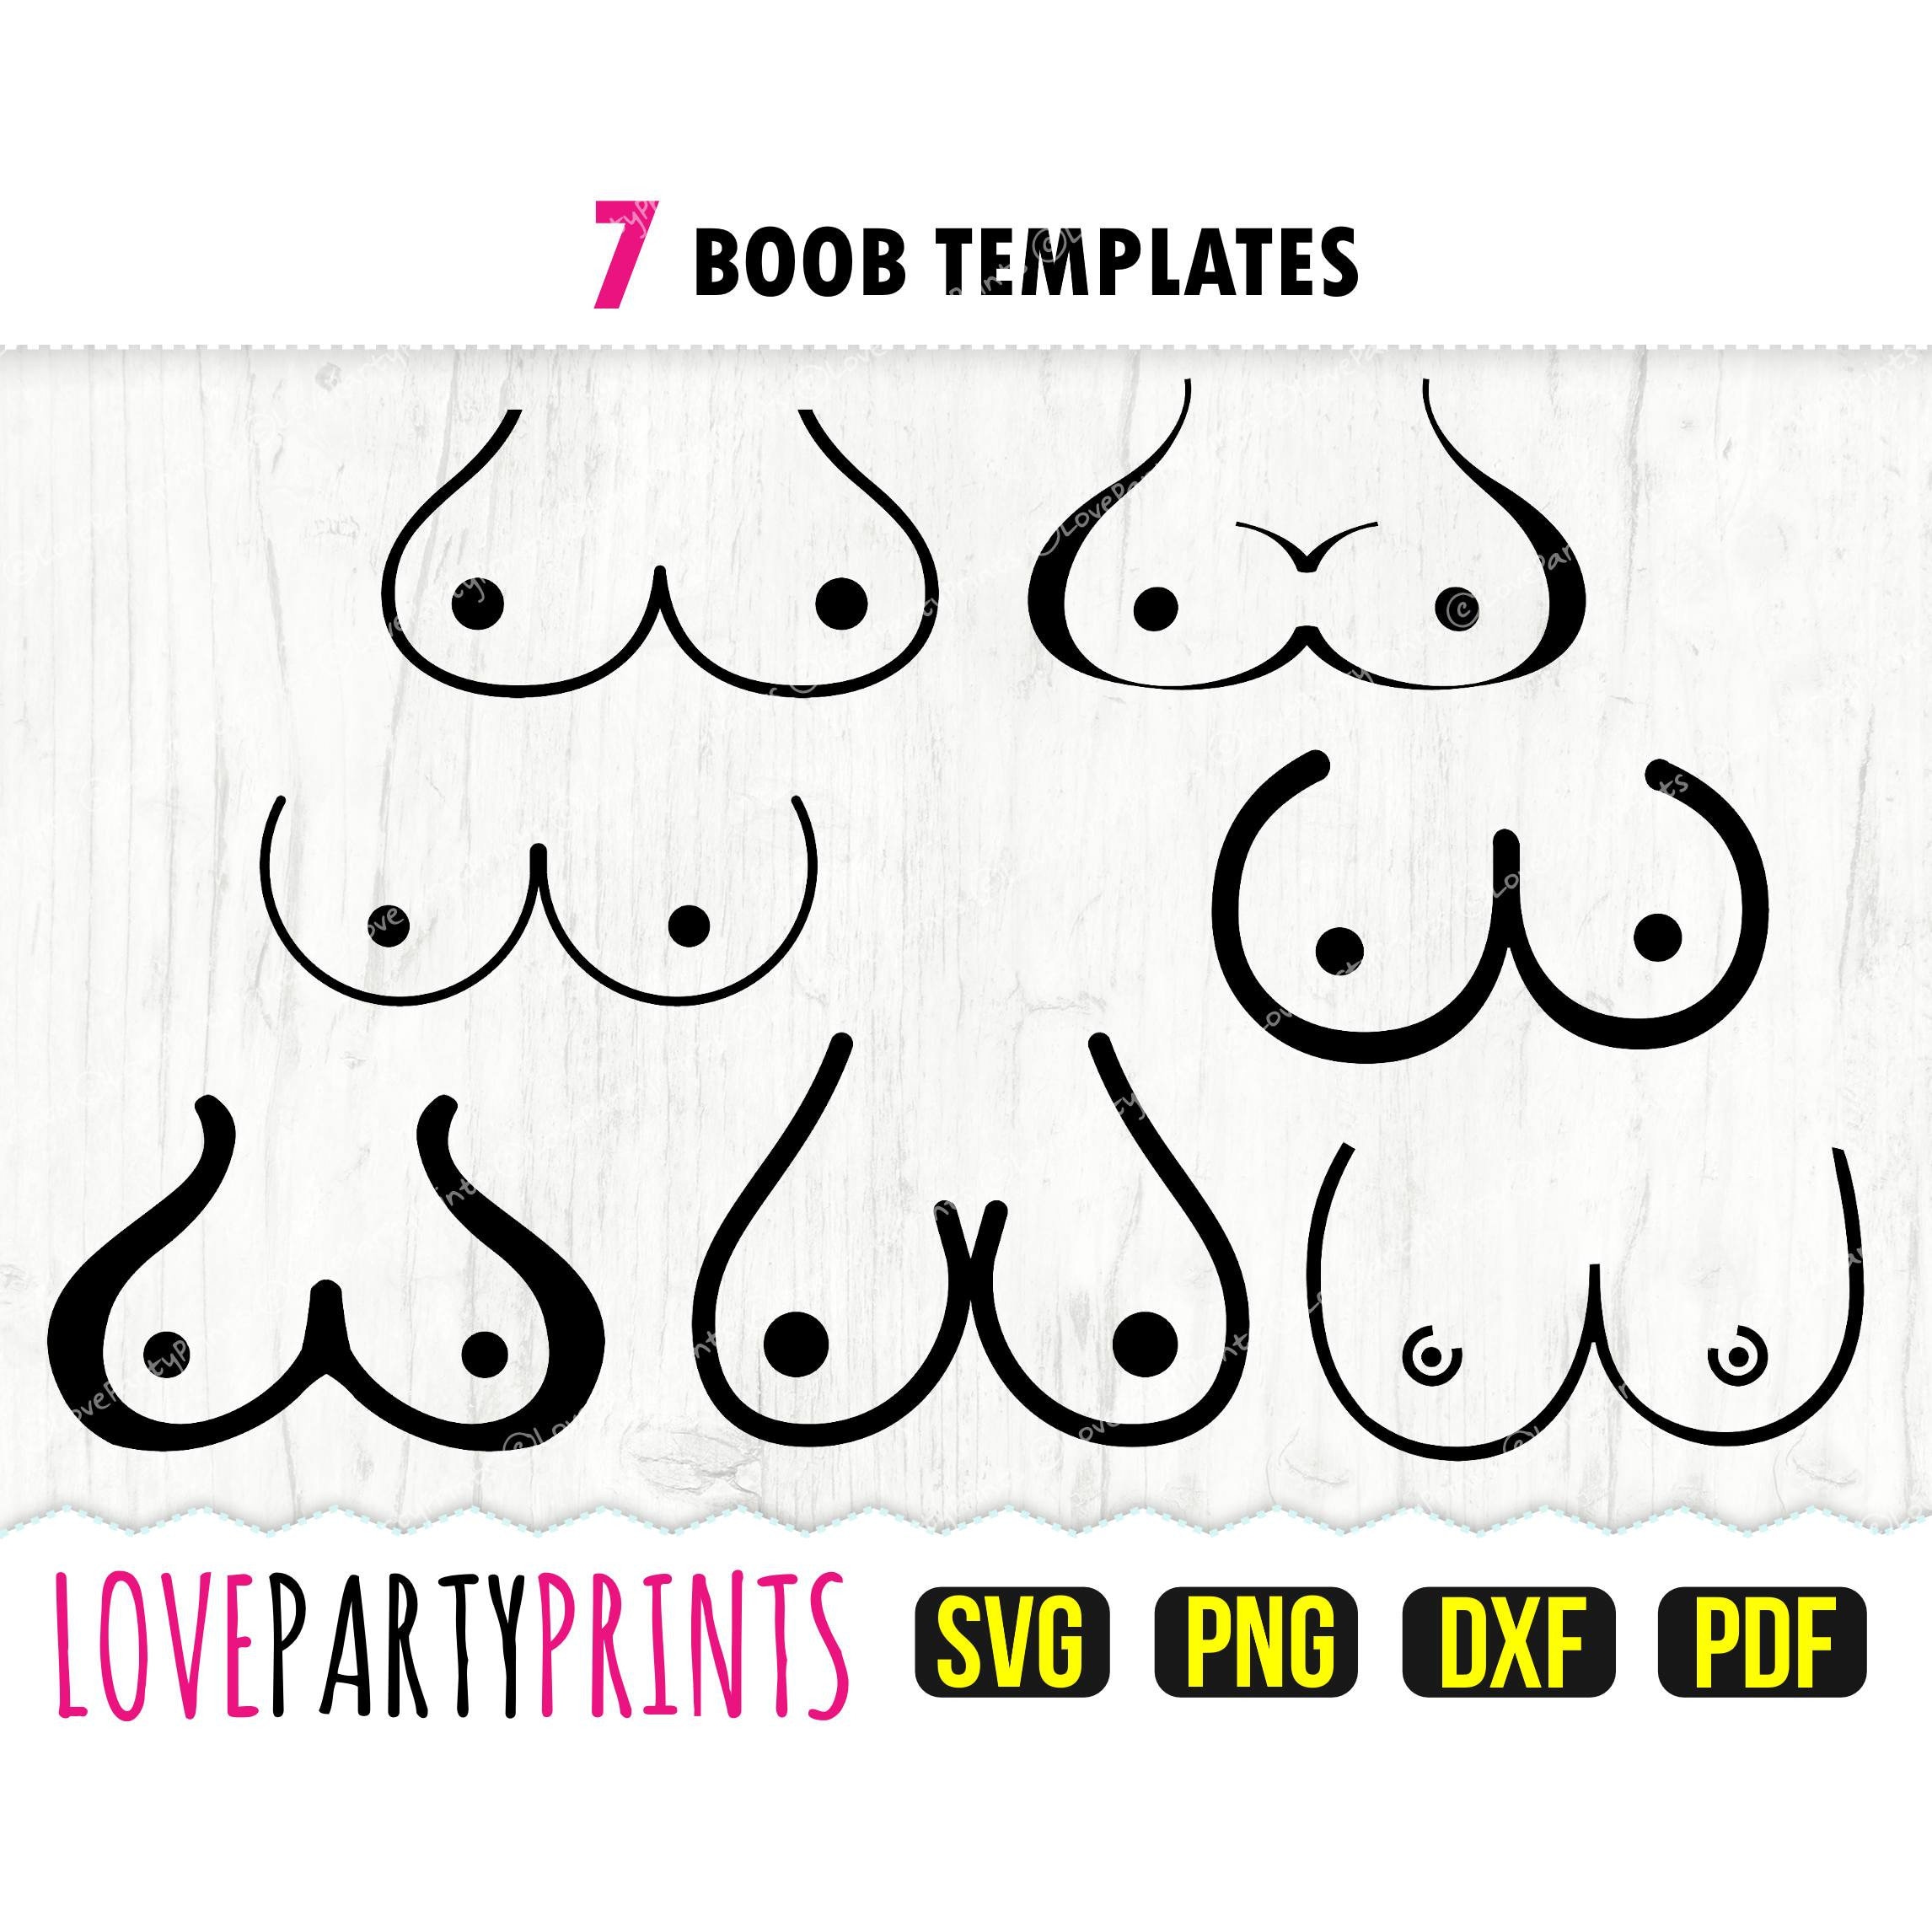 Boobs Svg, Hand Drawn Boobies Svg. Tits Svg. Vector Cut File for Cricut,  Silhouette, Sticker, Decal, Vinyl, Stencil, Pdf Png Dxf Eps. -  Israel